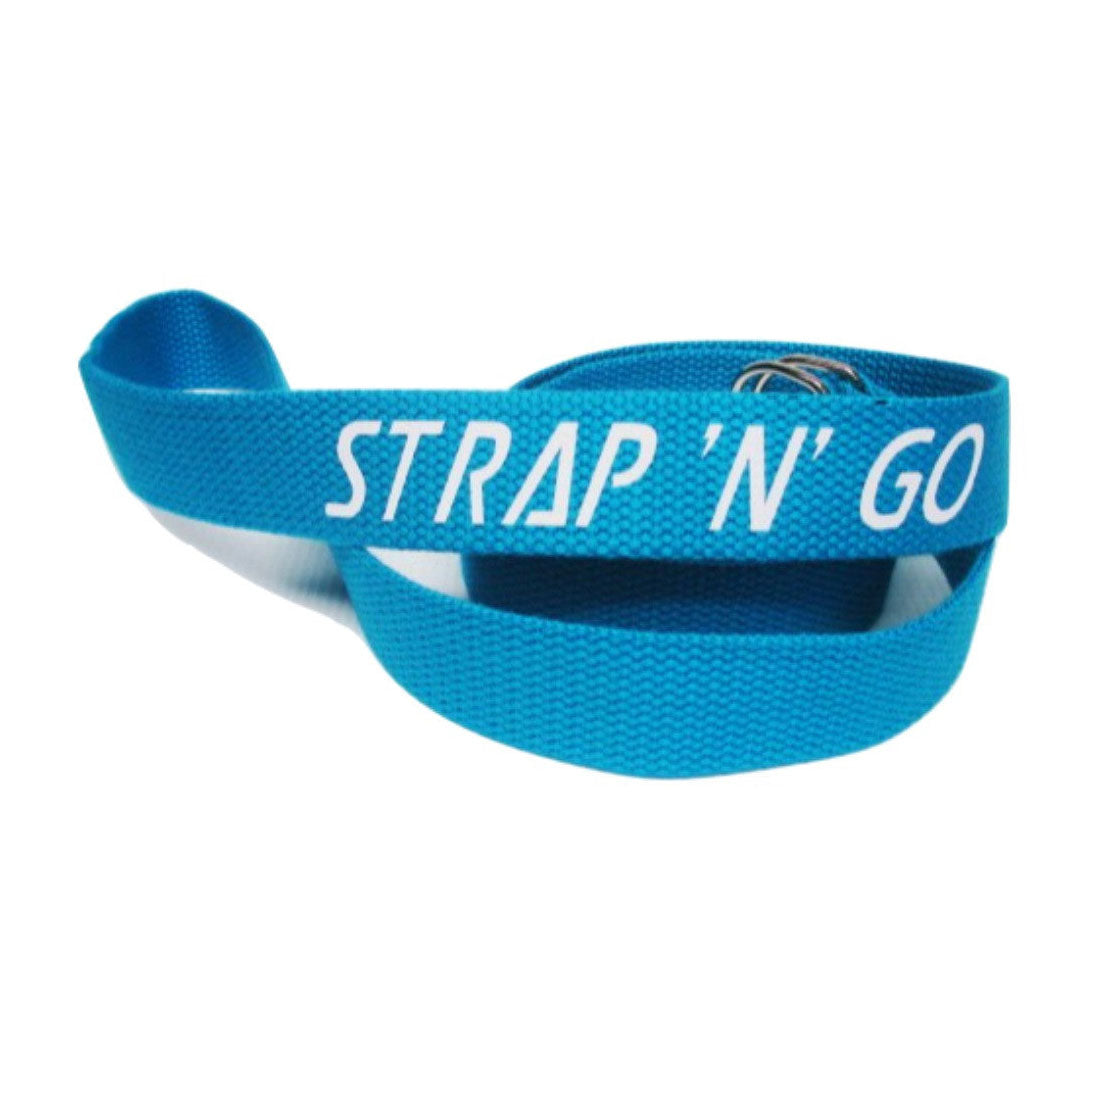 Strap N Go Skate Noose/Leash - Solid Colours Turquoise Roller Skate Accessories